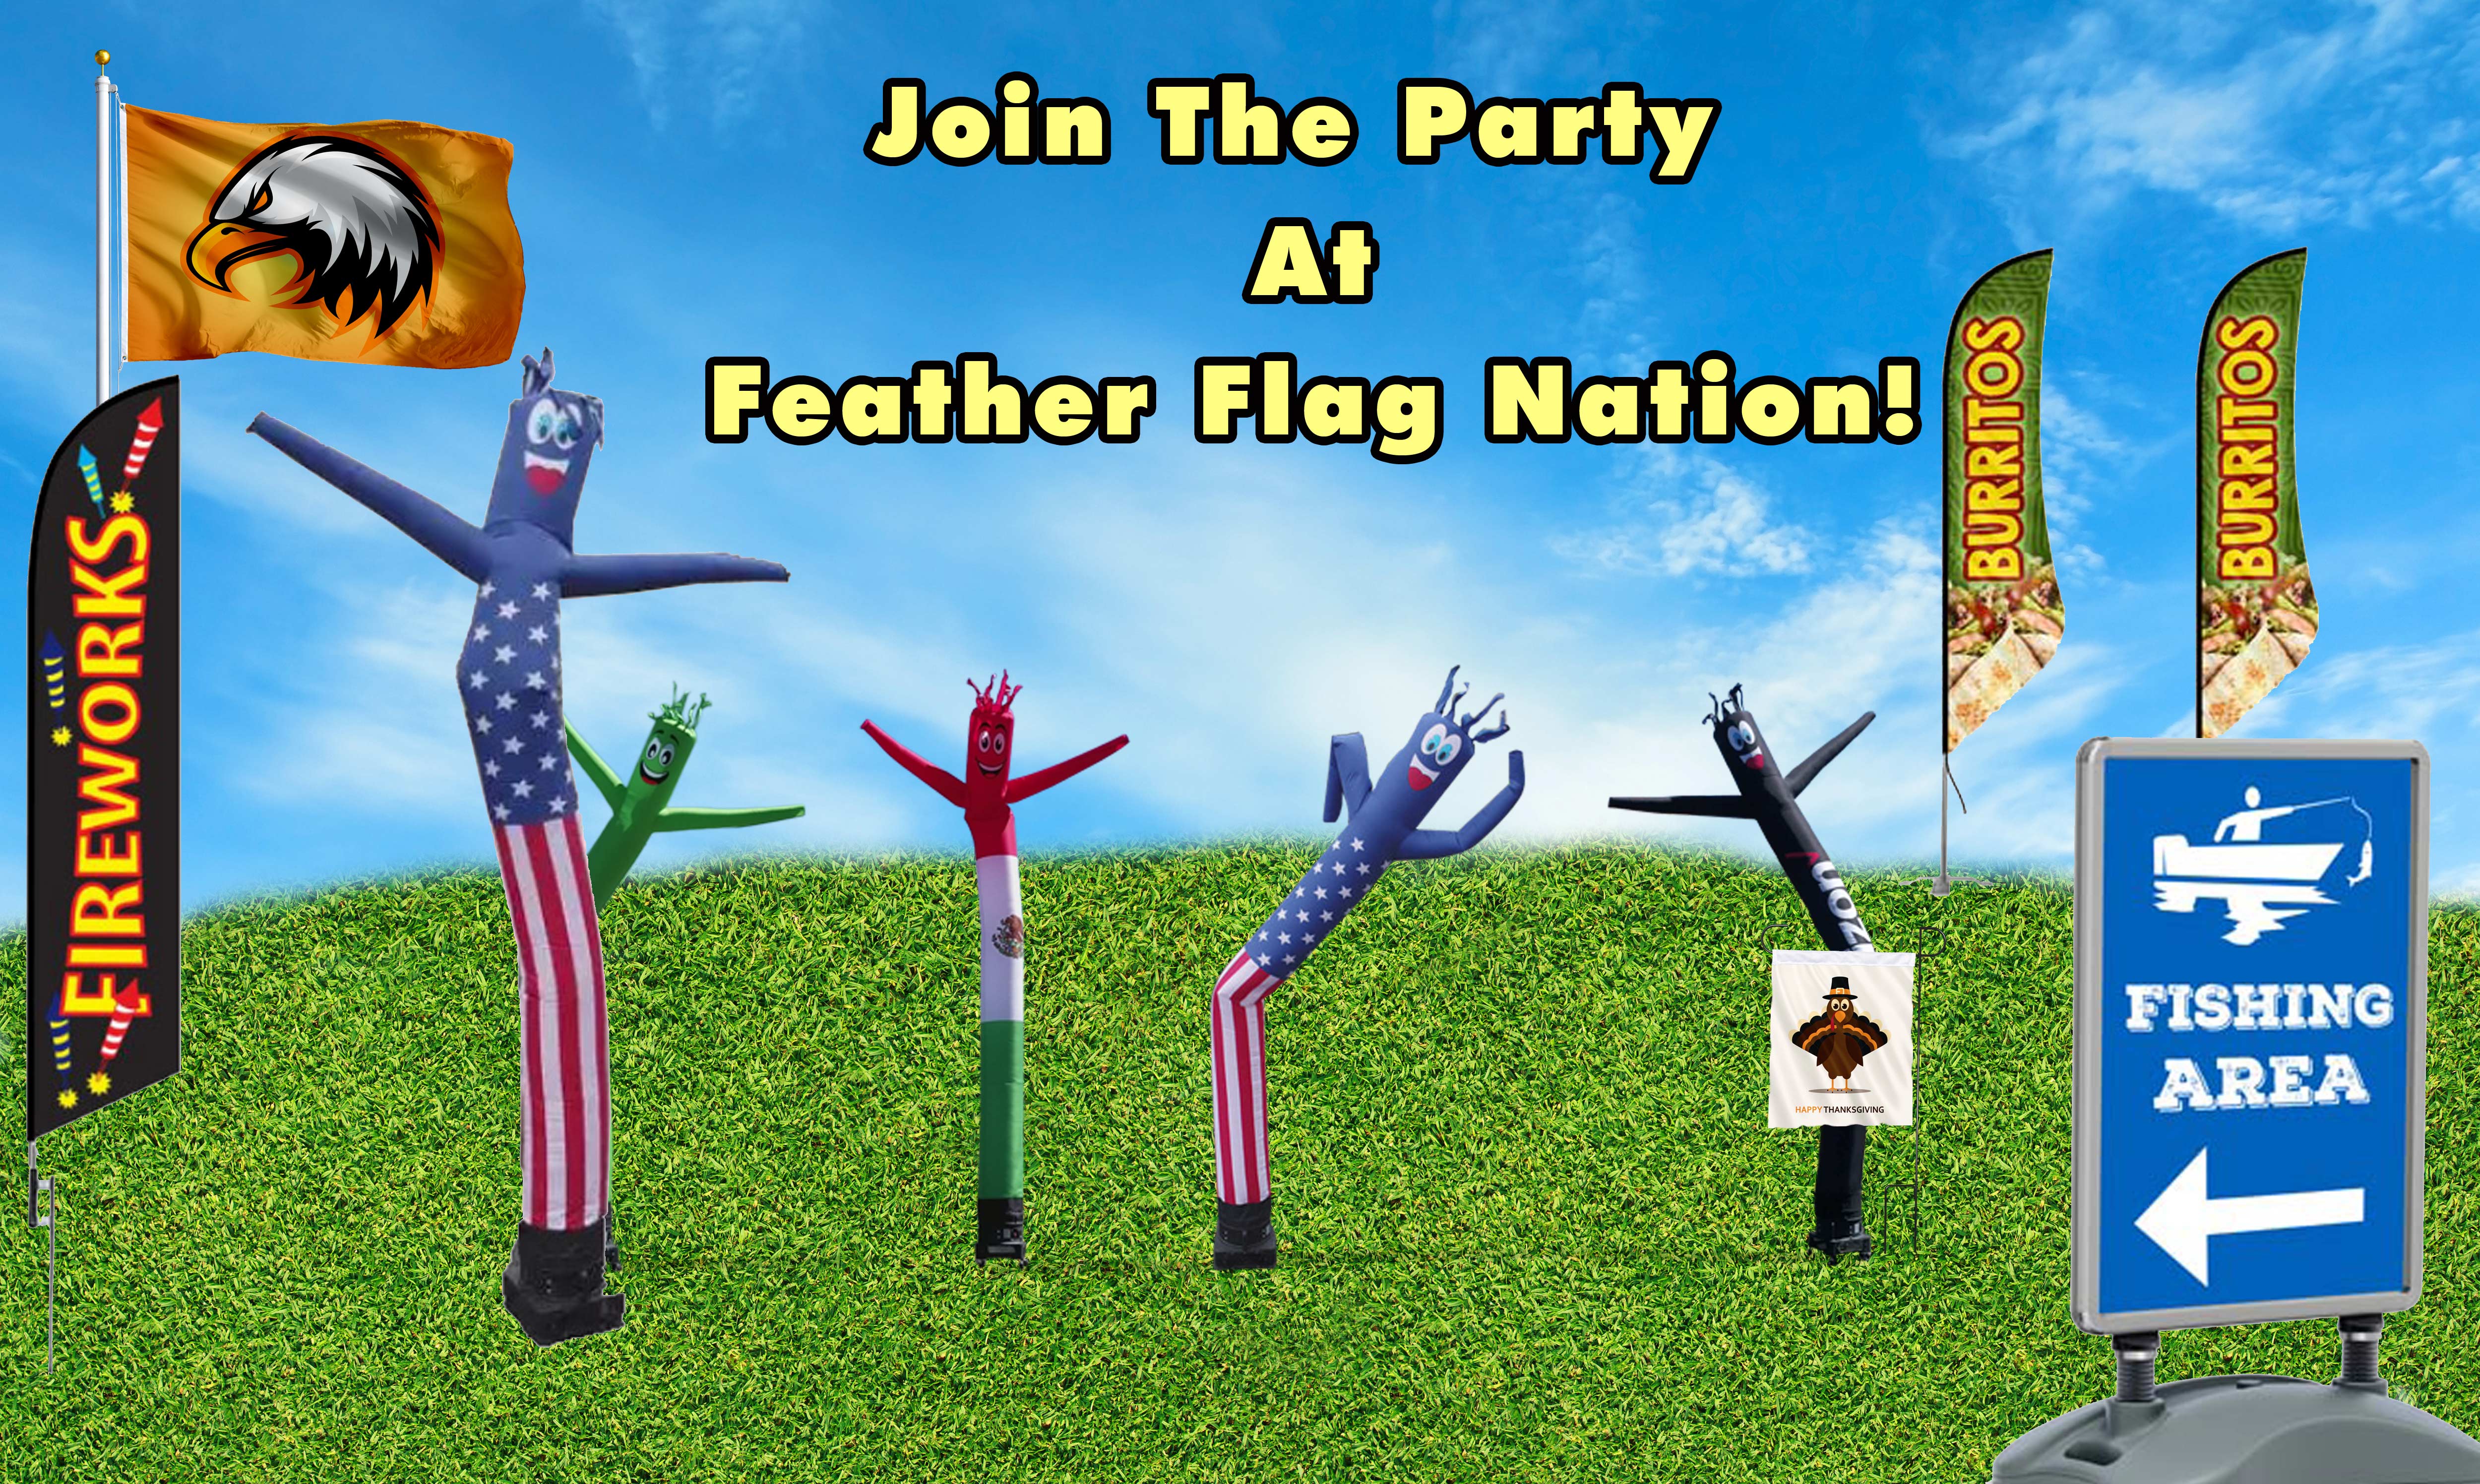 feather-flags-a-frames-tube-men-feather-flag-nation-lawn-sign.jpg